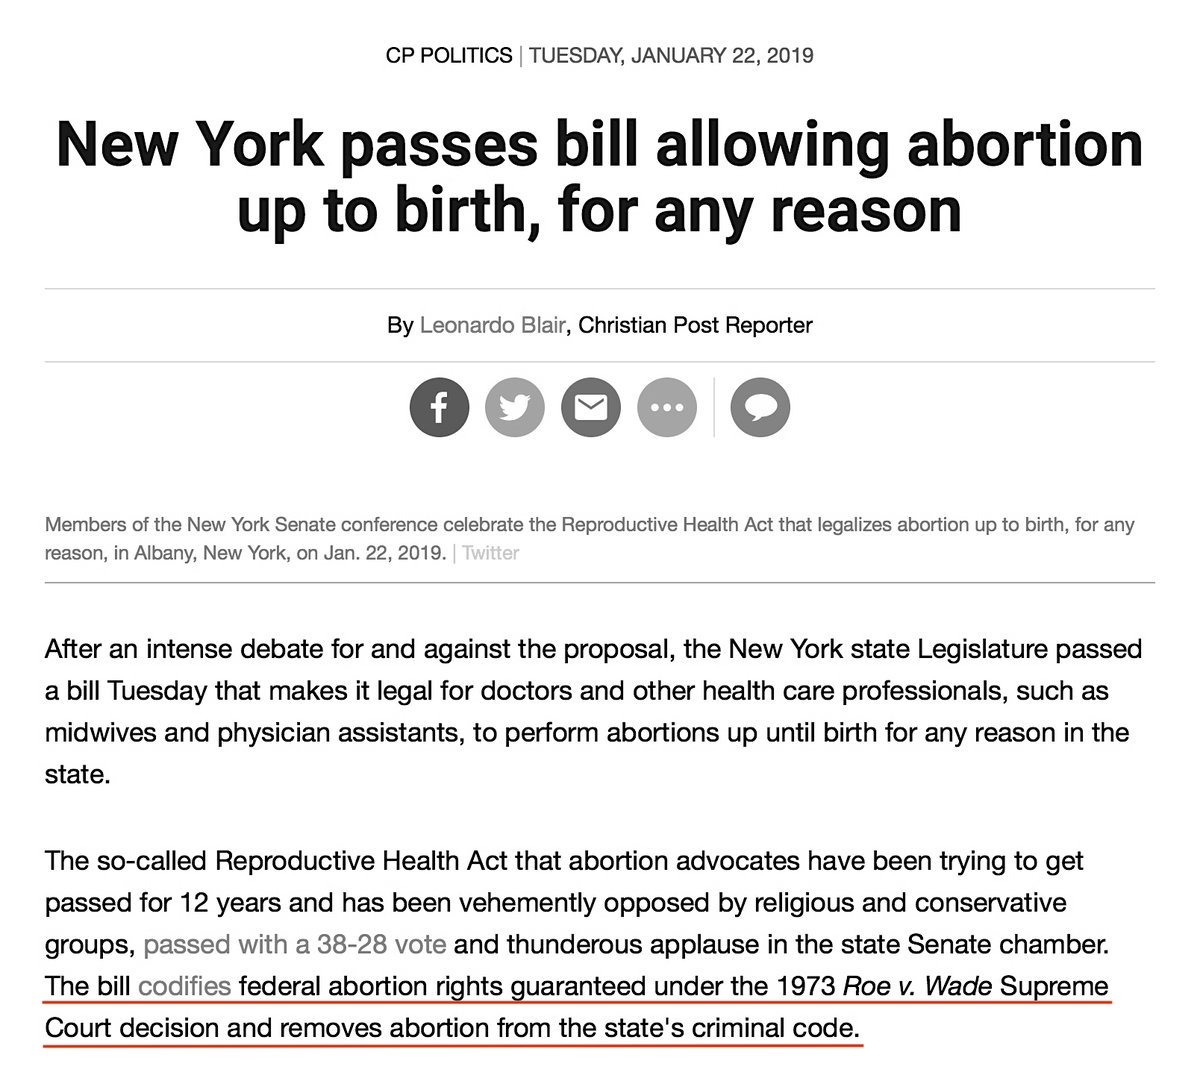 Gov. Cuomo's 'Reproductive Health Act' Is Not So Much About Women's Rights As It Is About The Sales Of Baby Parts. Big Business. Aborted Fetuses Are Also Used In Development Of Vaccines, As I Referenced Earlier In This Thread. https://www.christianpost.com/news/new-york-legislature-passes-bill-allowing-abortions-up-to-birth-for-any-reason.html #QAnon  #AbortionLaw  @potus